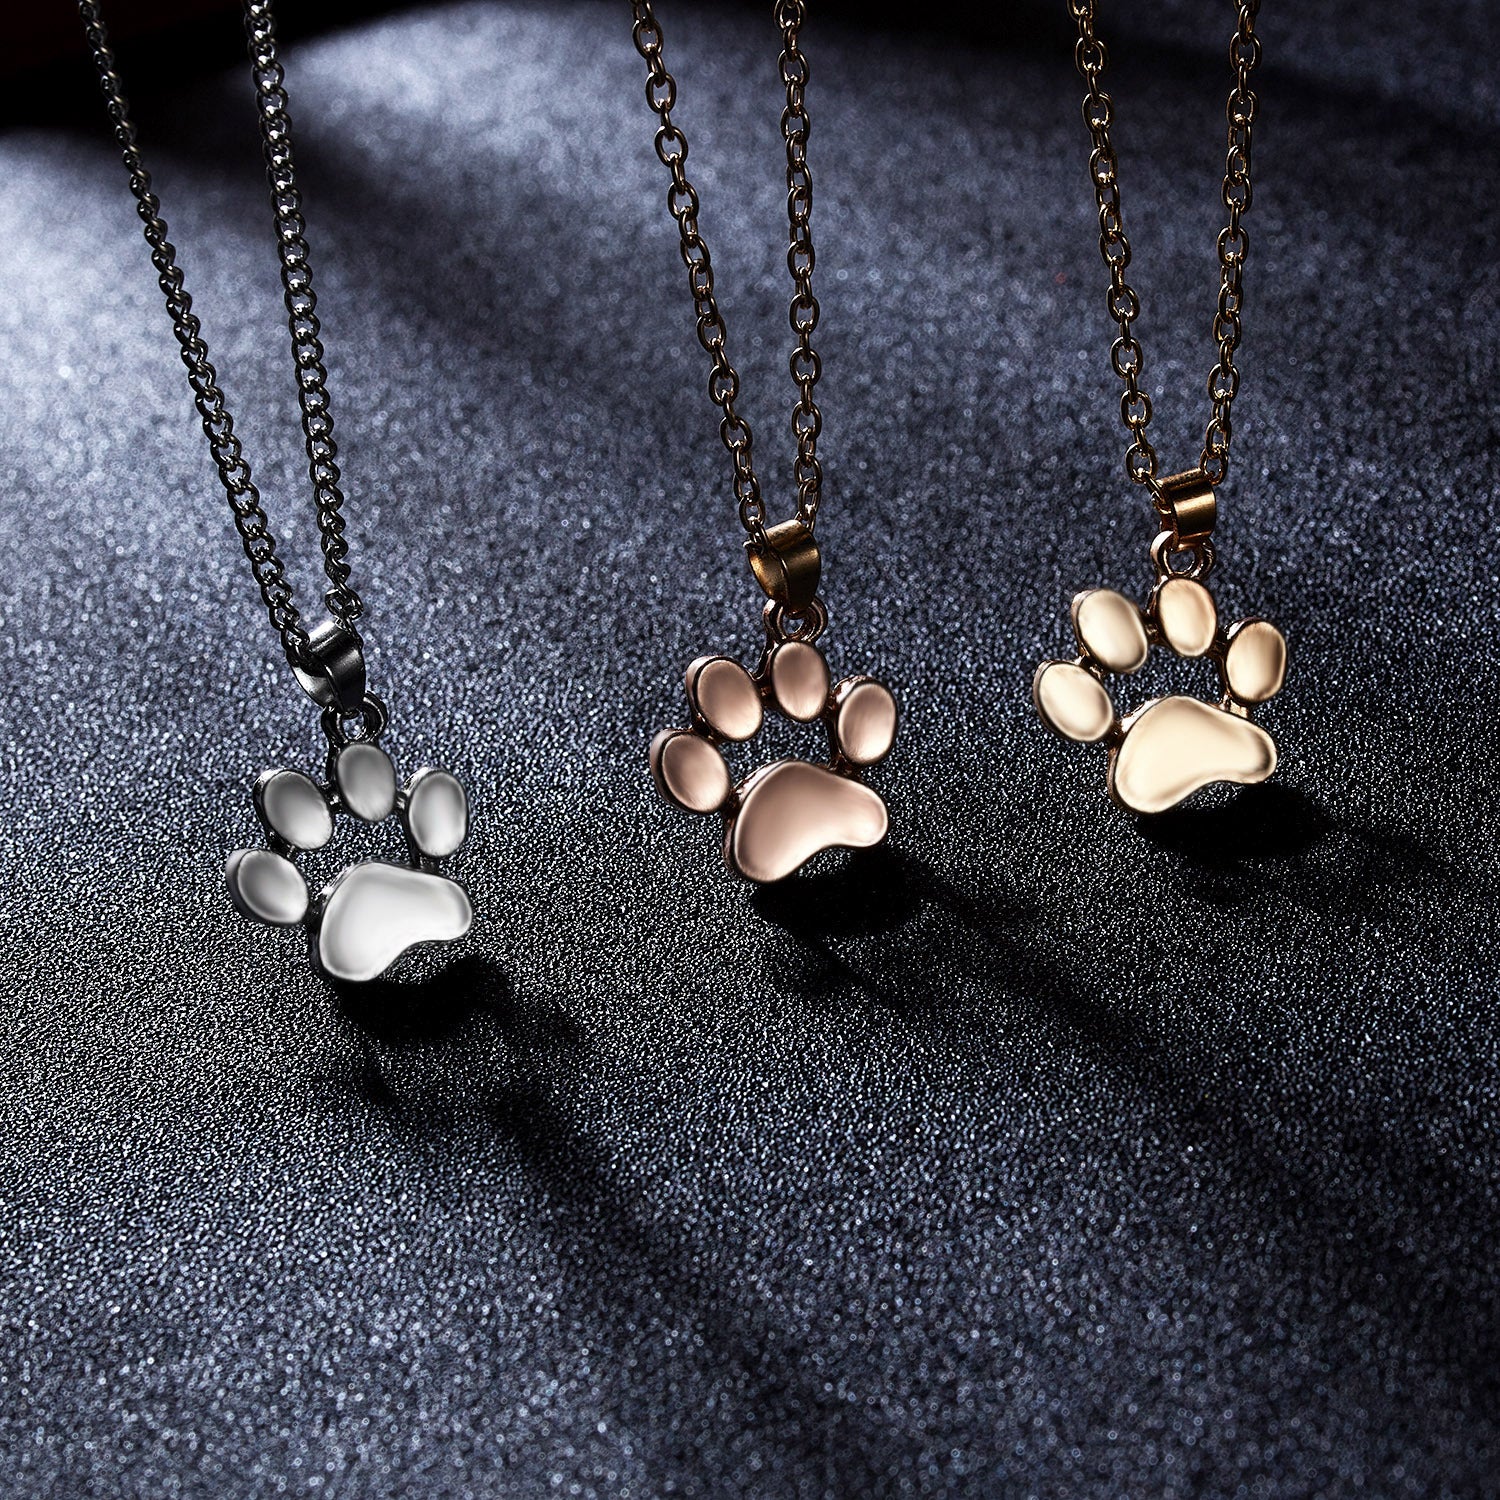 Cute Cat Paw Foot Necklace - Nekoby Cute Cat Paw Foot Necklace